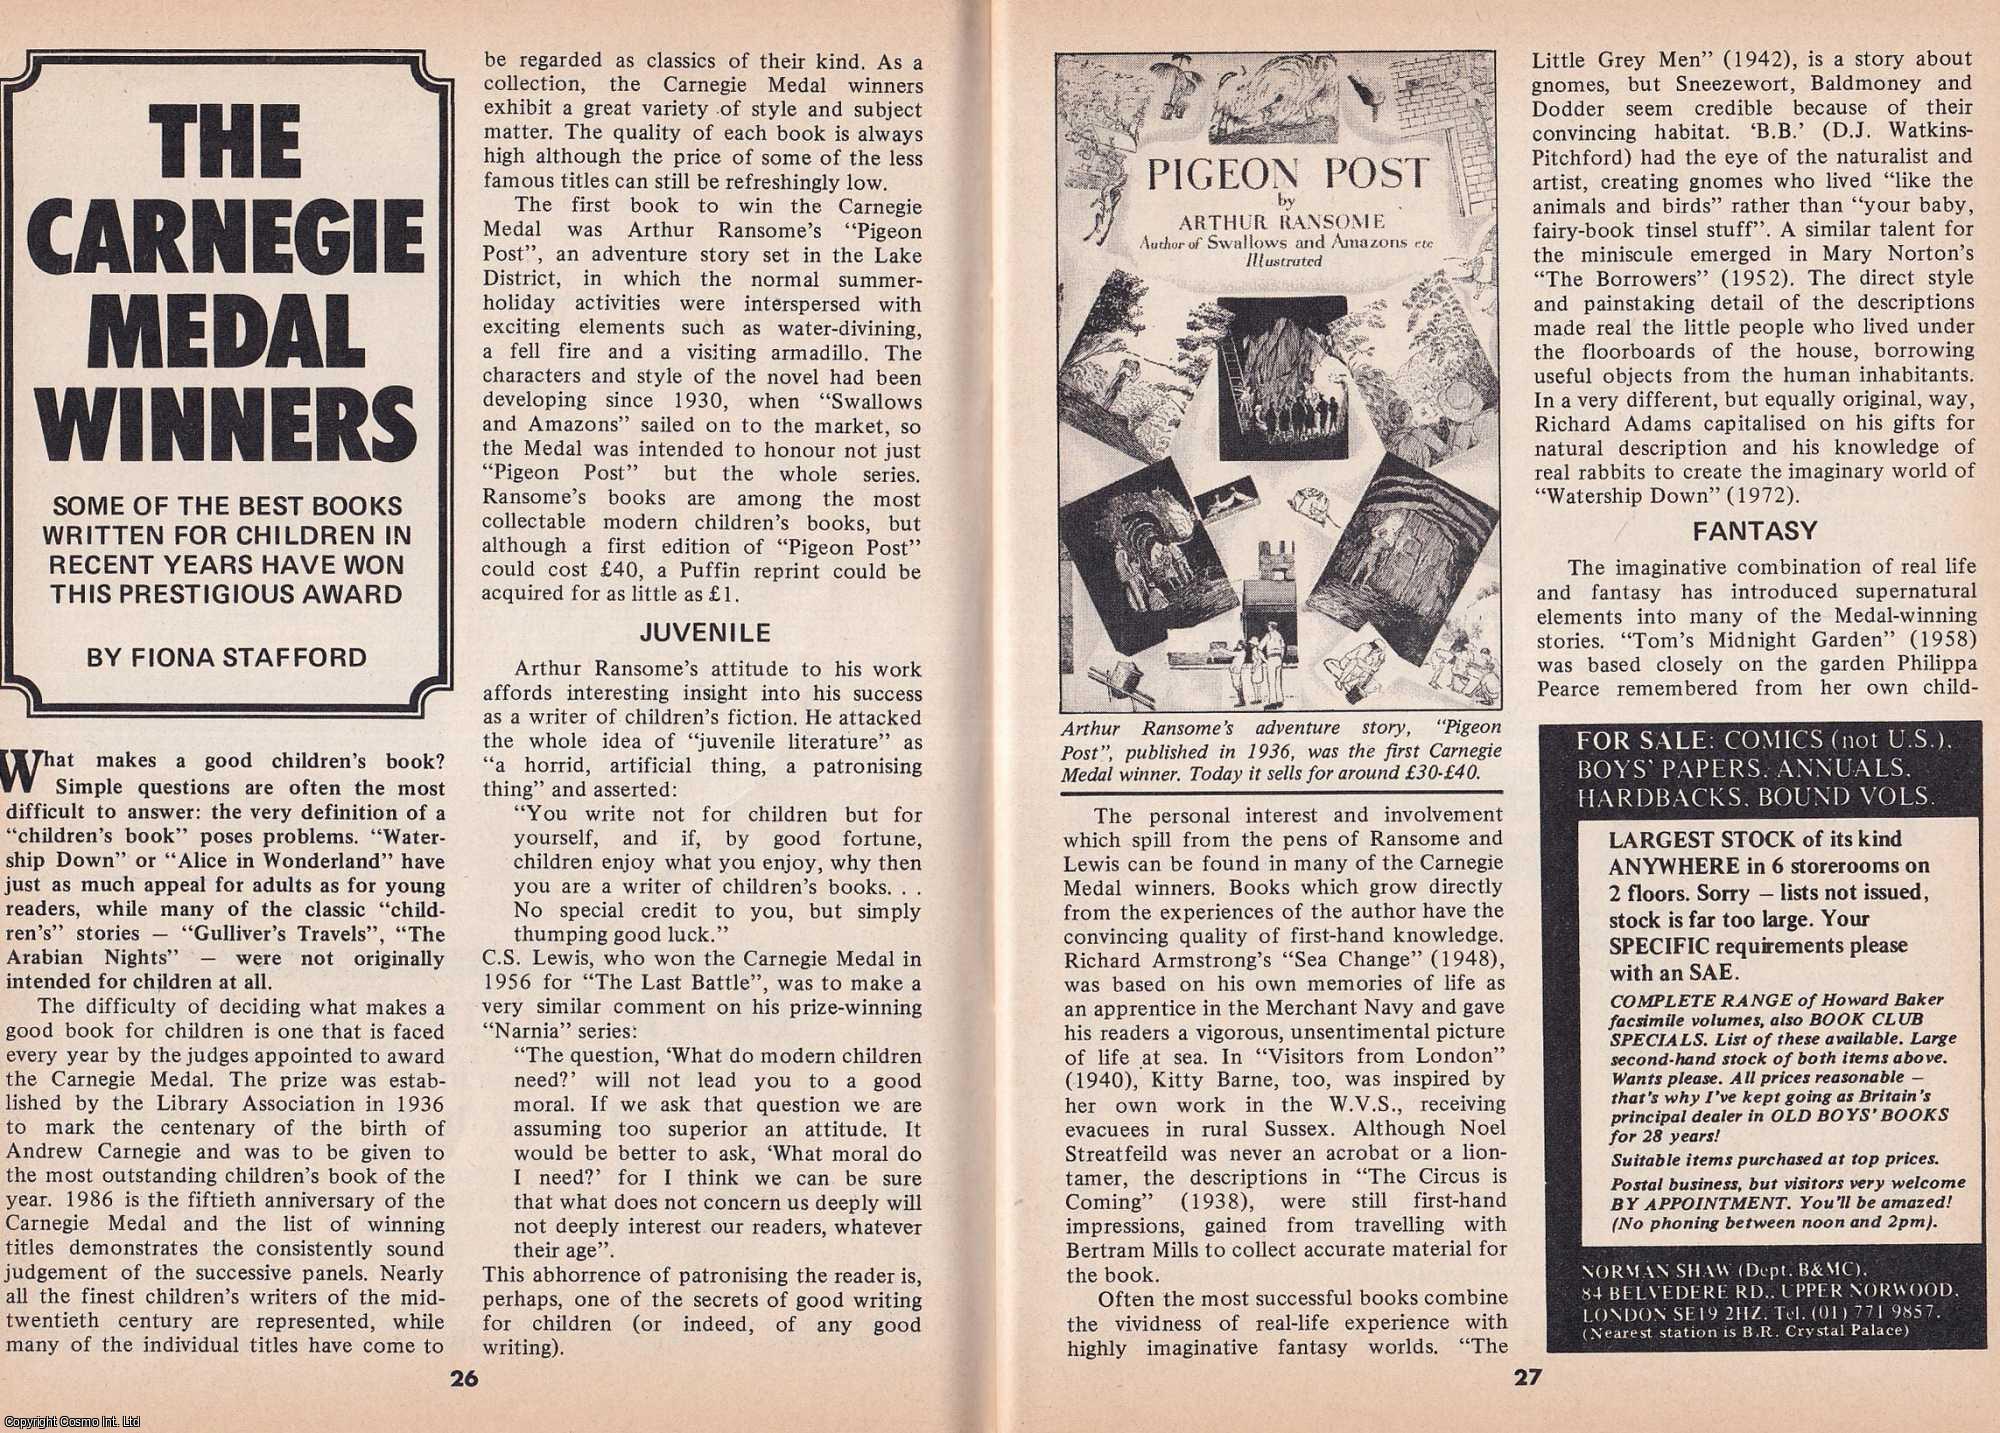 Fiona Stafford - The Carnegie Medal Winners. The Best Books Written for Children. This is an original article separated from an issue of The Book & Magazine Collector publication, 1986.